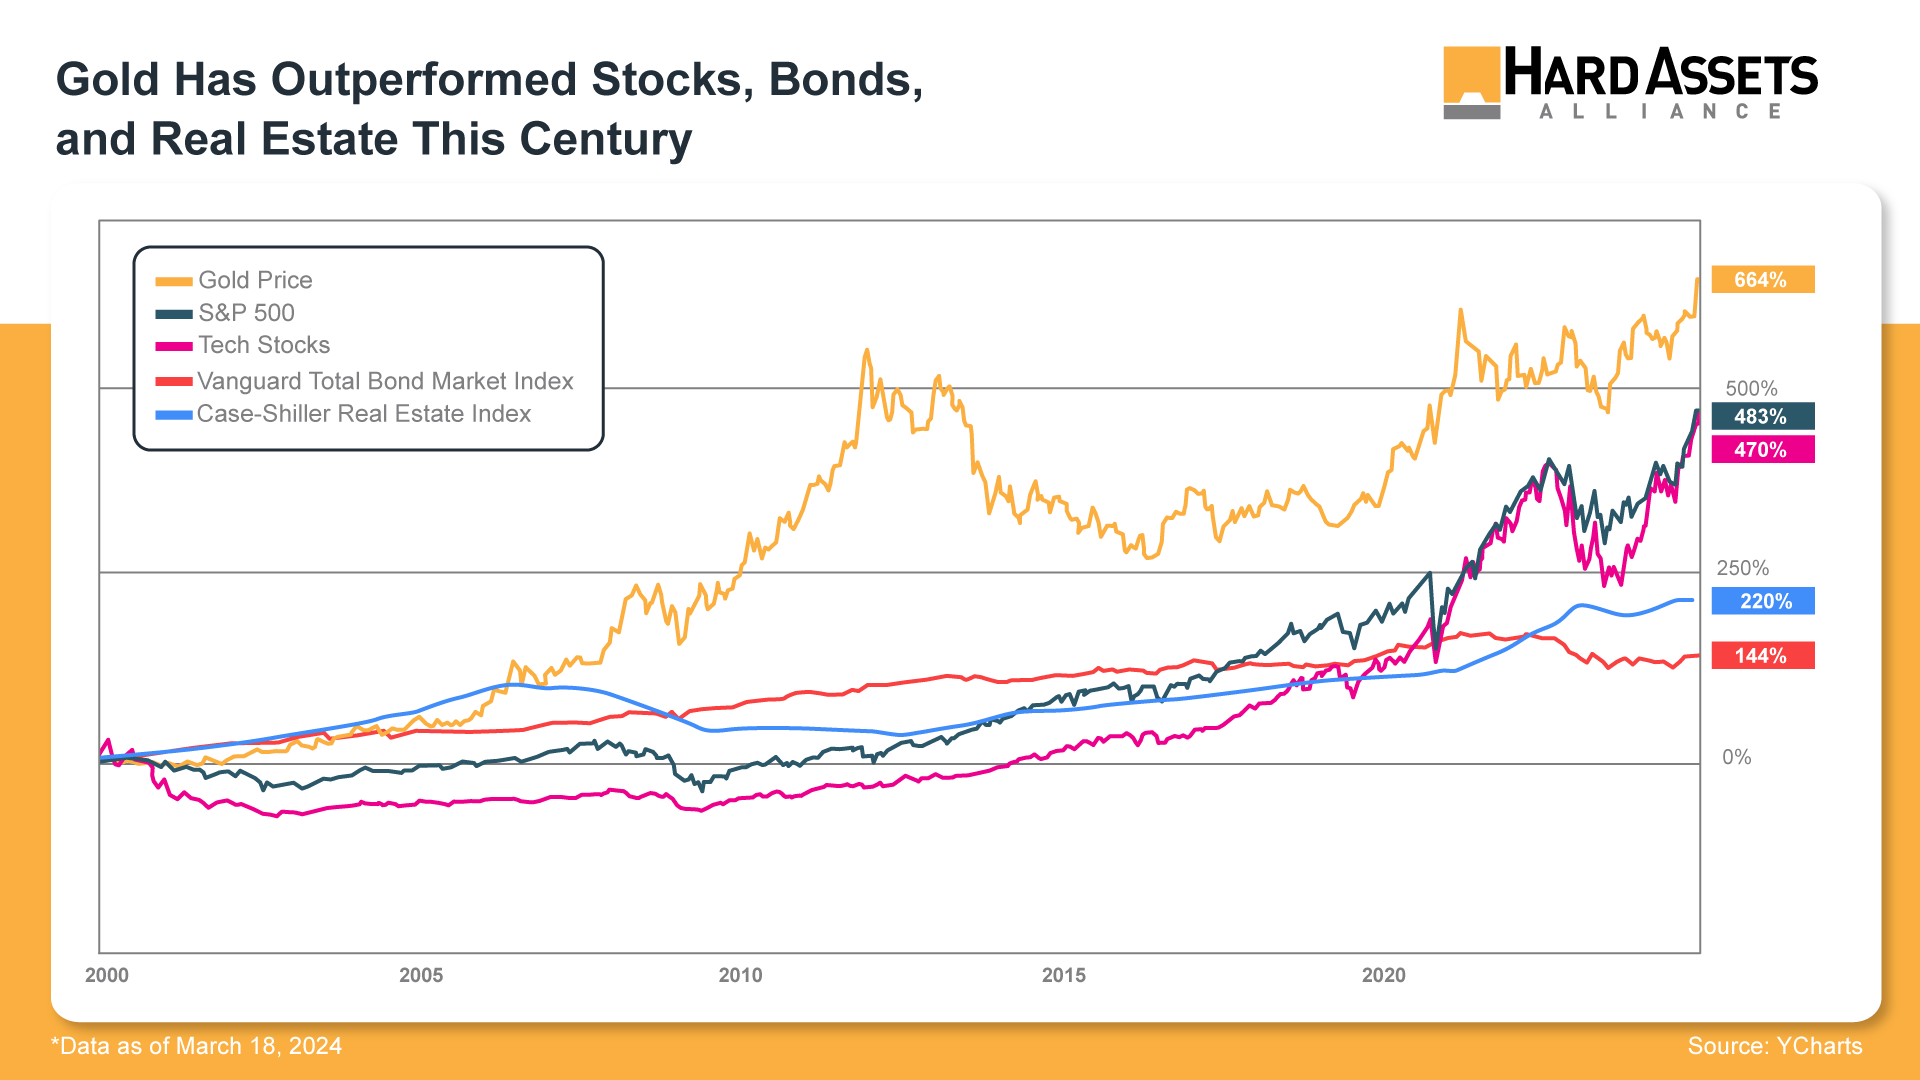 Gold Has Outperformed